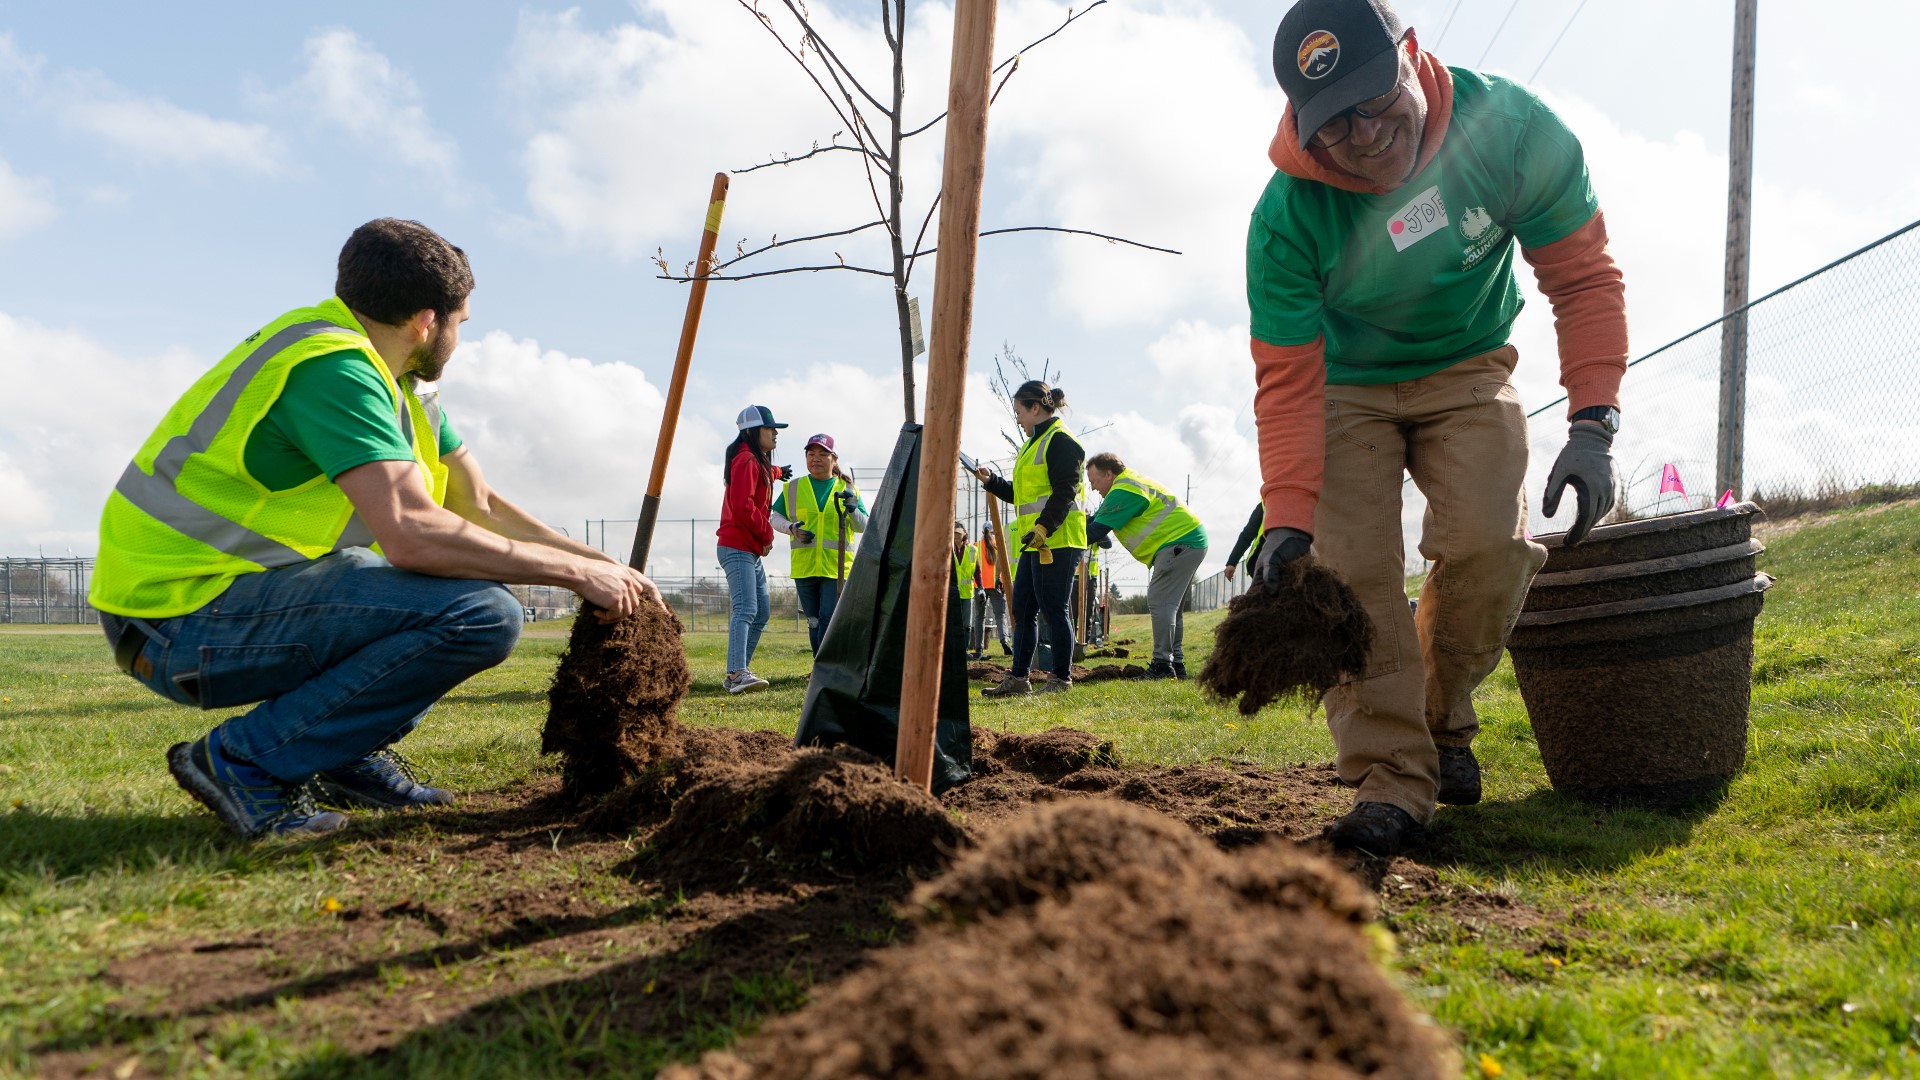 A historic amount of money is being spent on urban tree planting and maintenance in underserved, often concrete-covered neighborhoods.